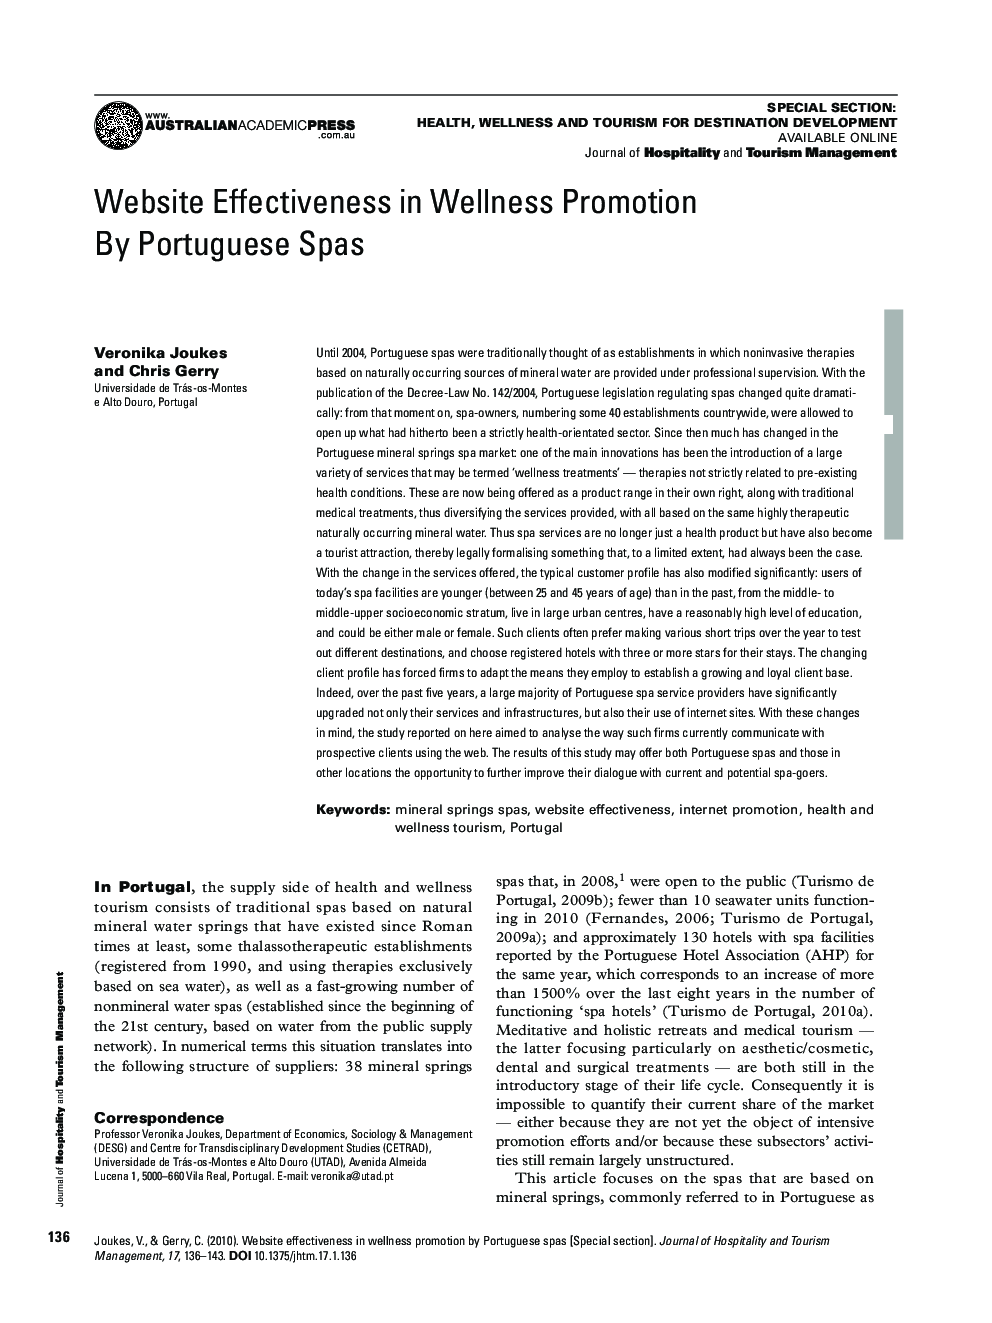 Website Effectiveness in Wellness Promotion By Portuguese Spas